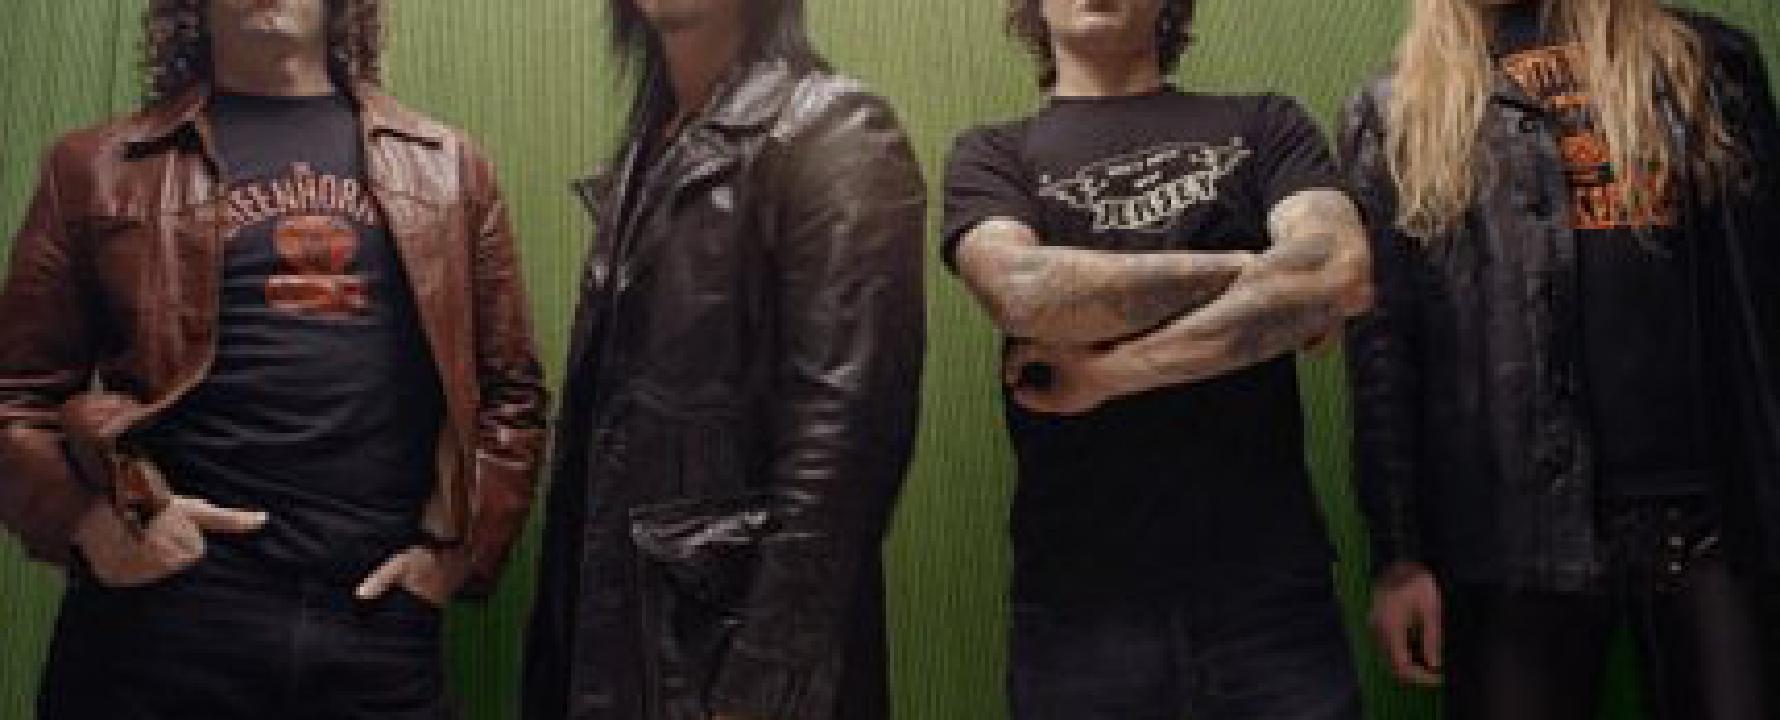 Promotional photograph of Monster Magnet.